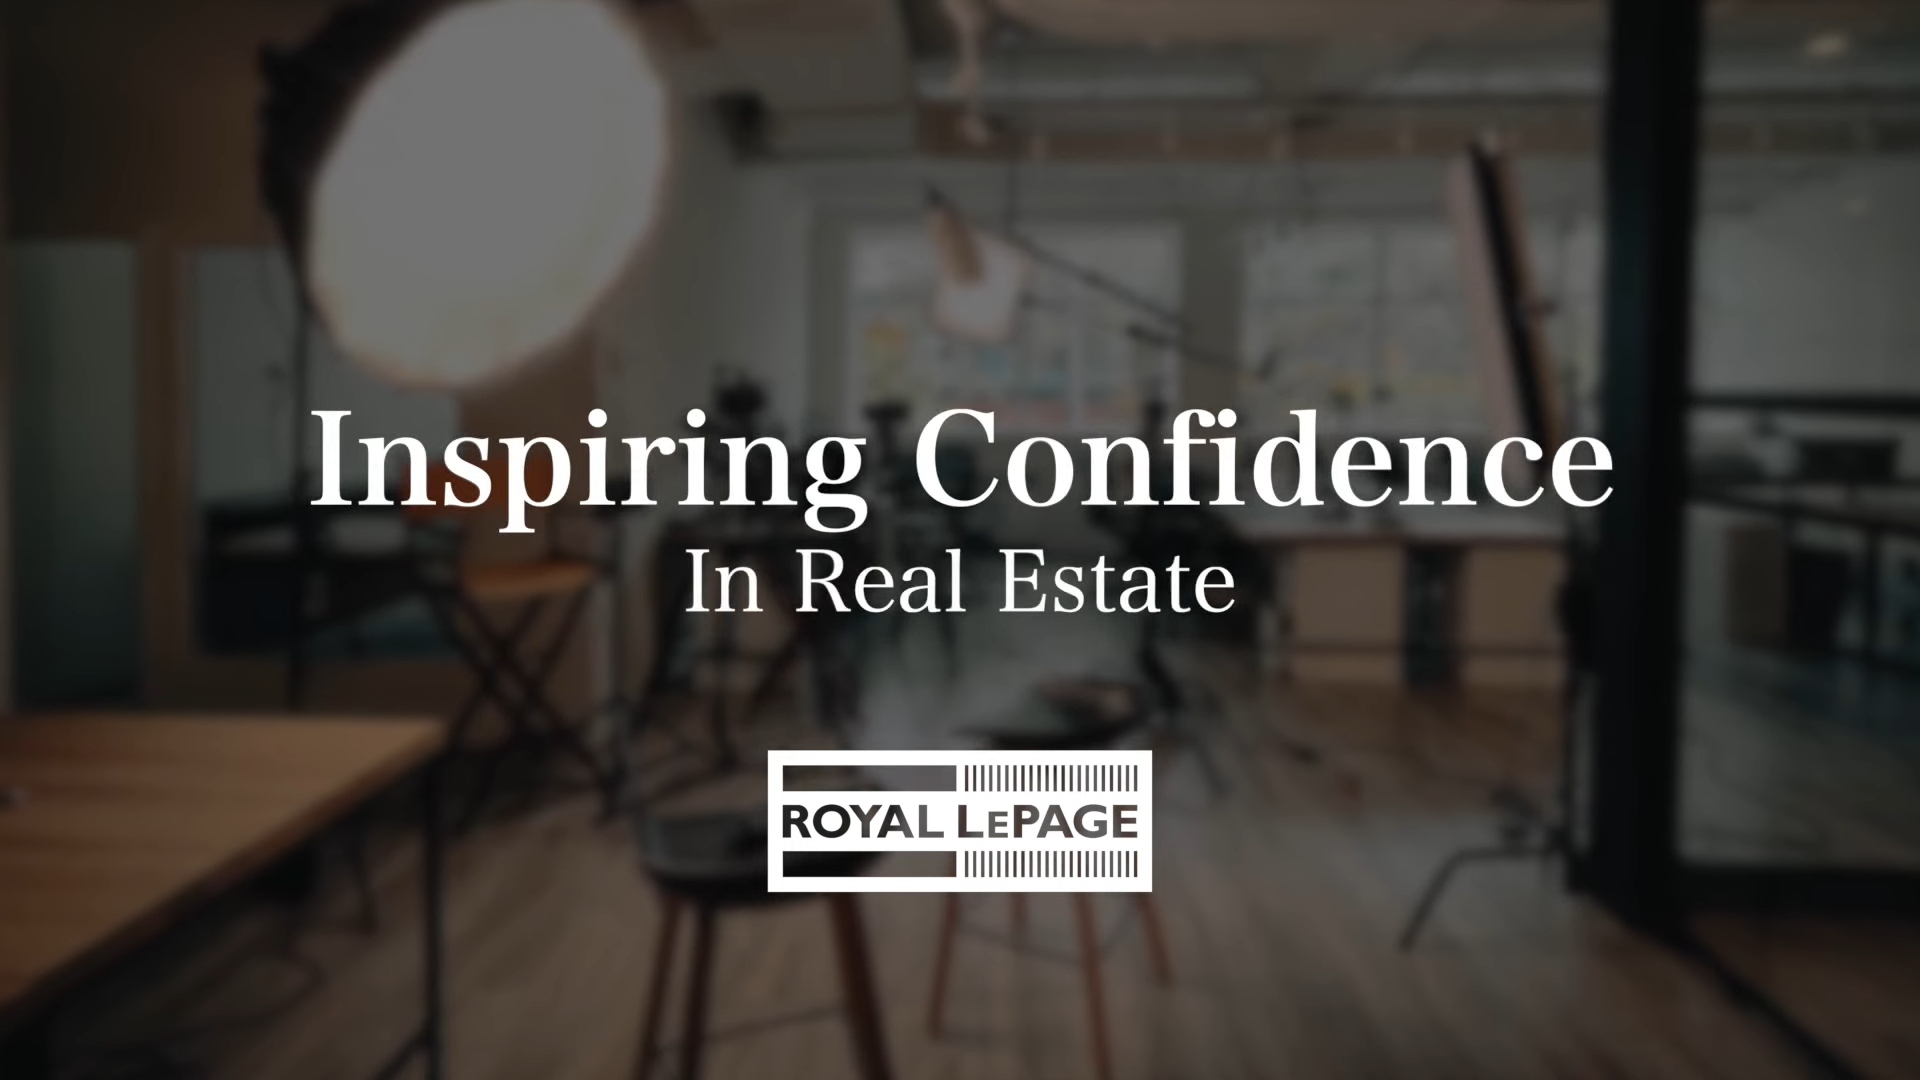 Royal LePage | WHY DID THEY CHOOSE ROYAL LEPAGE